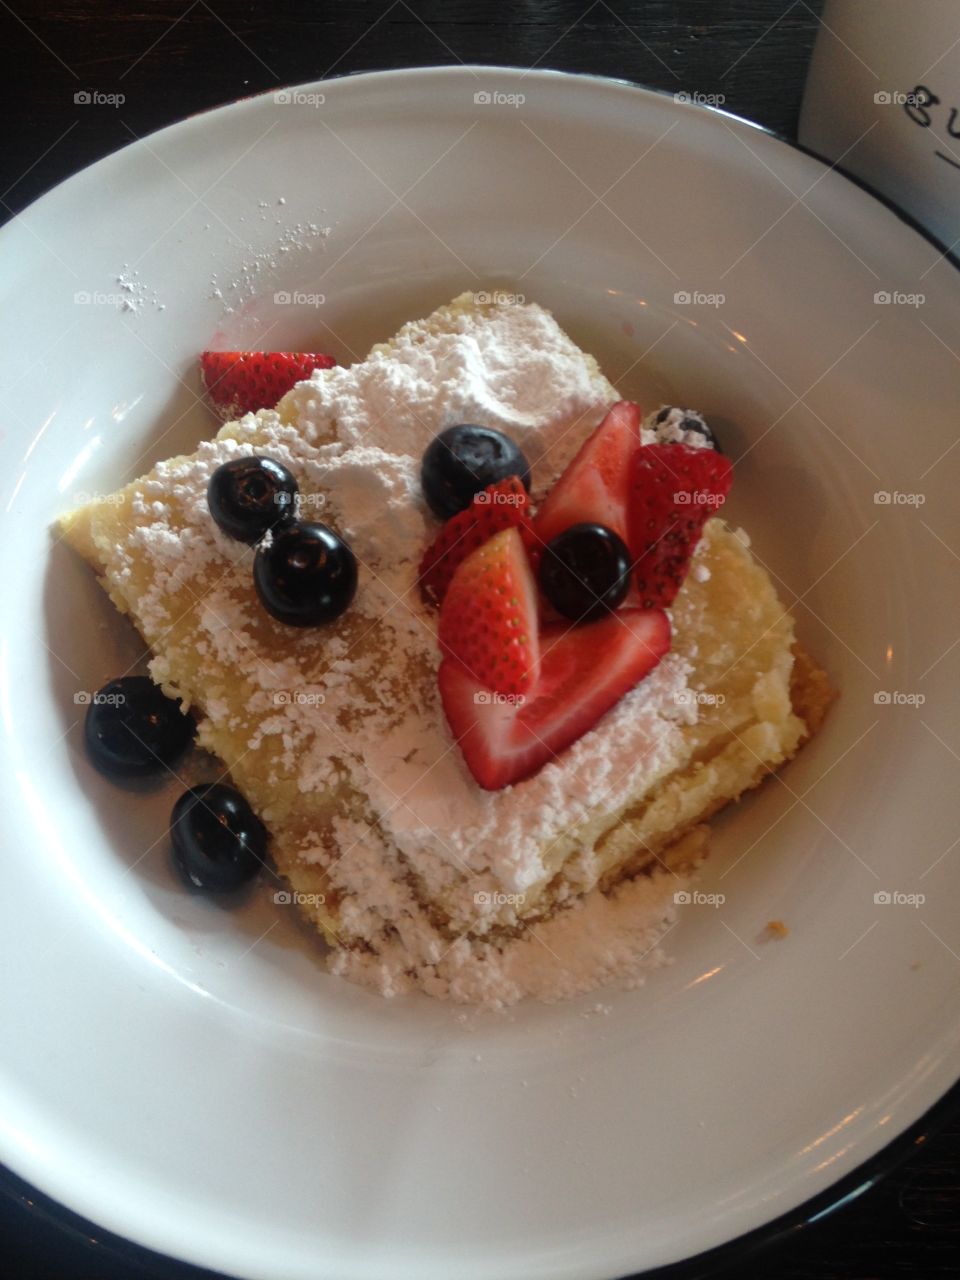 Delicious pound cake topped with locally sourced berries from a brunch with friends